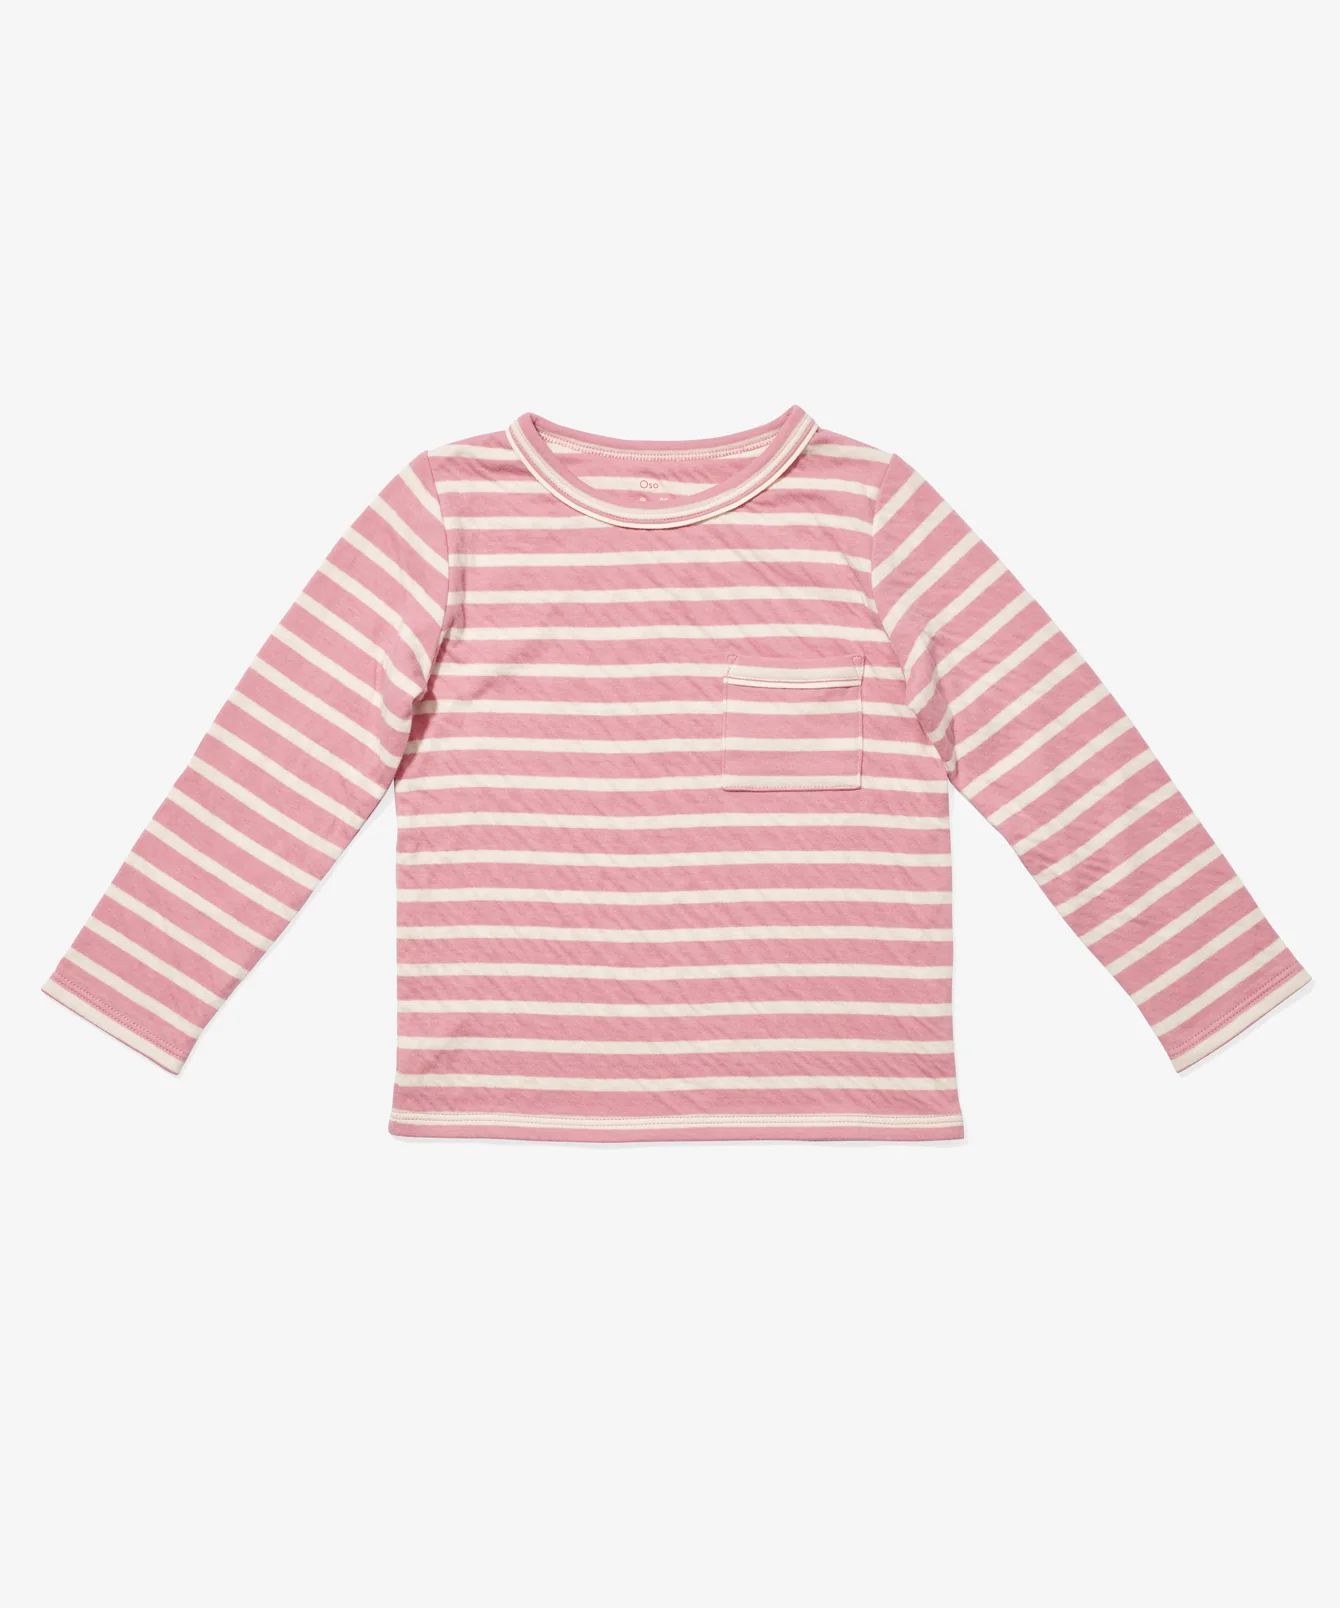 Super Soft Child Long Sleeve Shirt | Oso and Me | Oso & Me